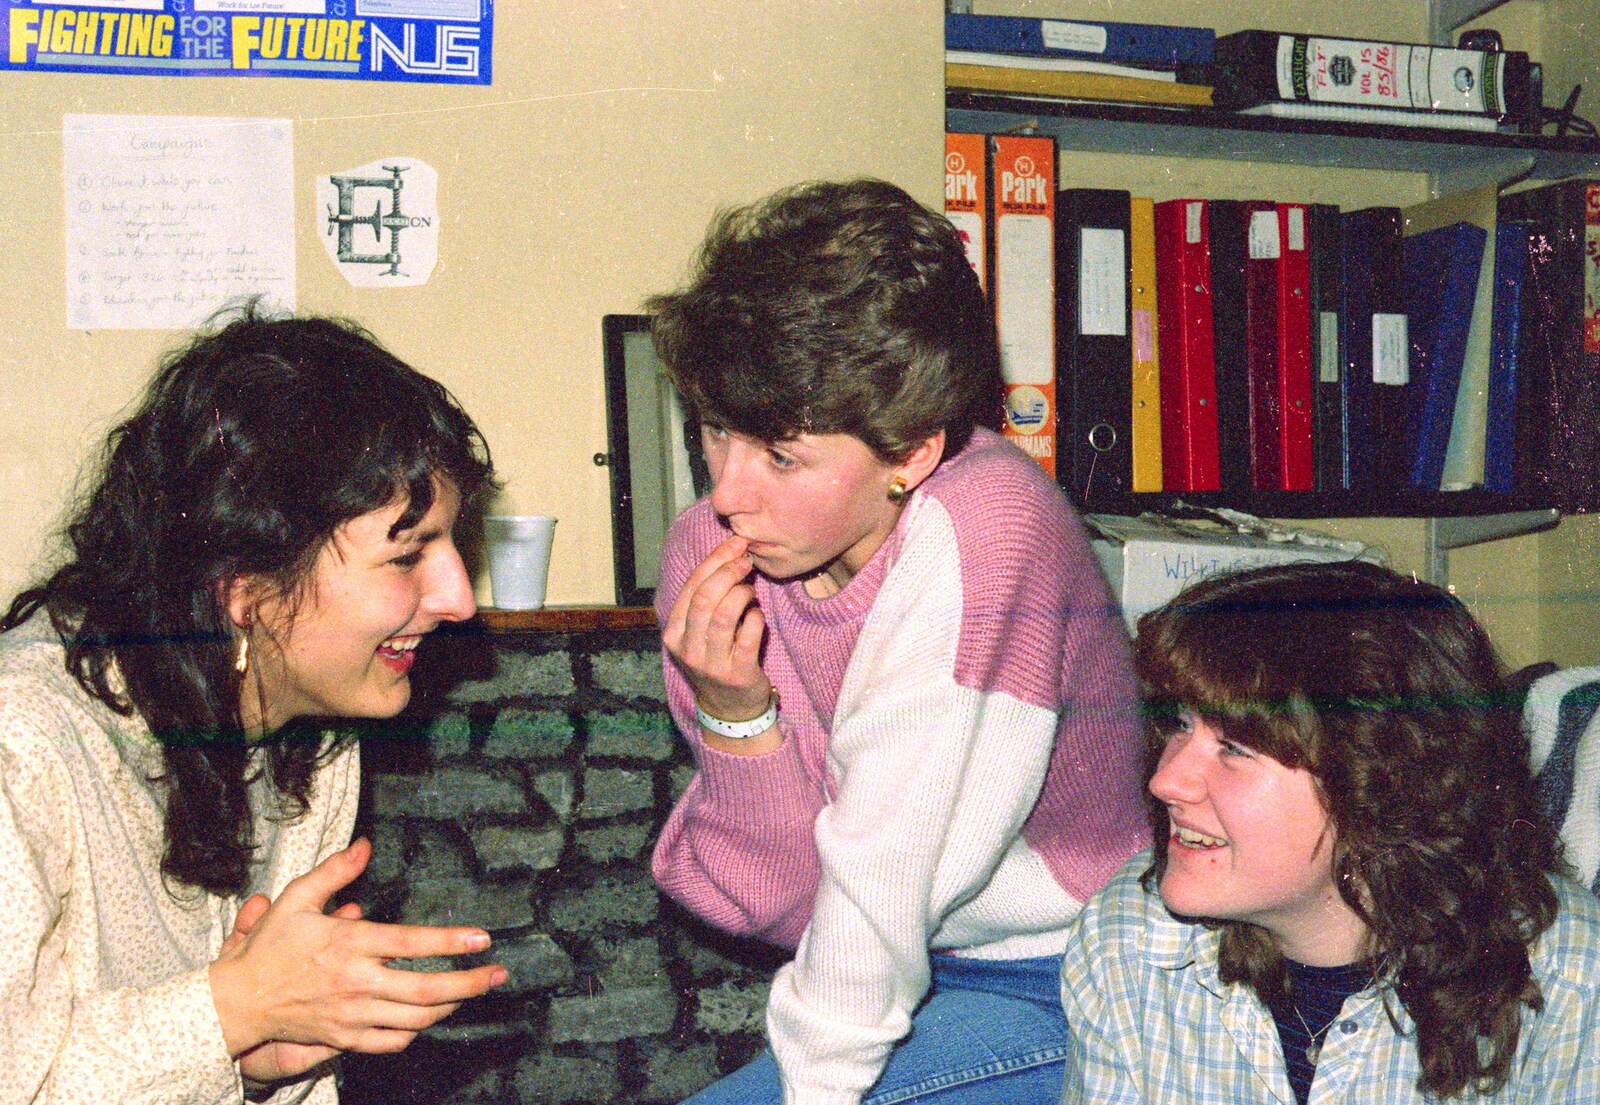 In-depth discussions from Uni: The Fly Christmas Party and BABS Panto, Plymouth Polytechnic, Devon - December 11th 1985